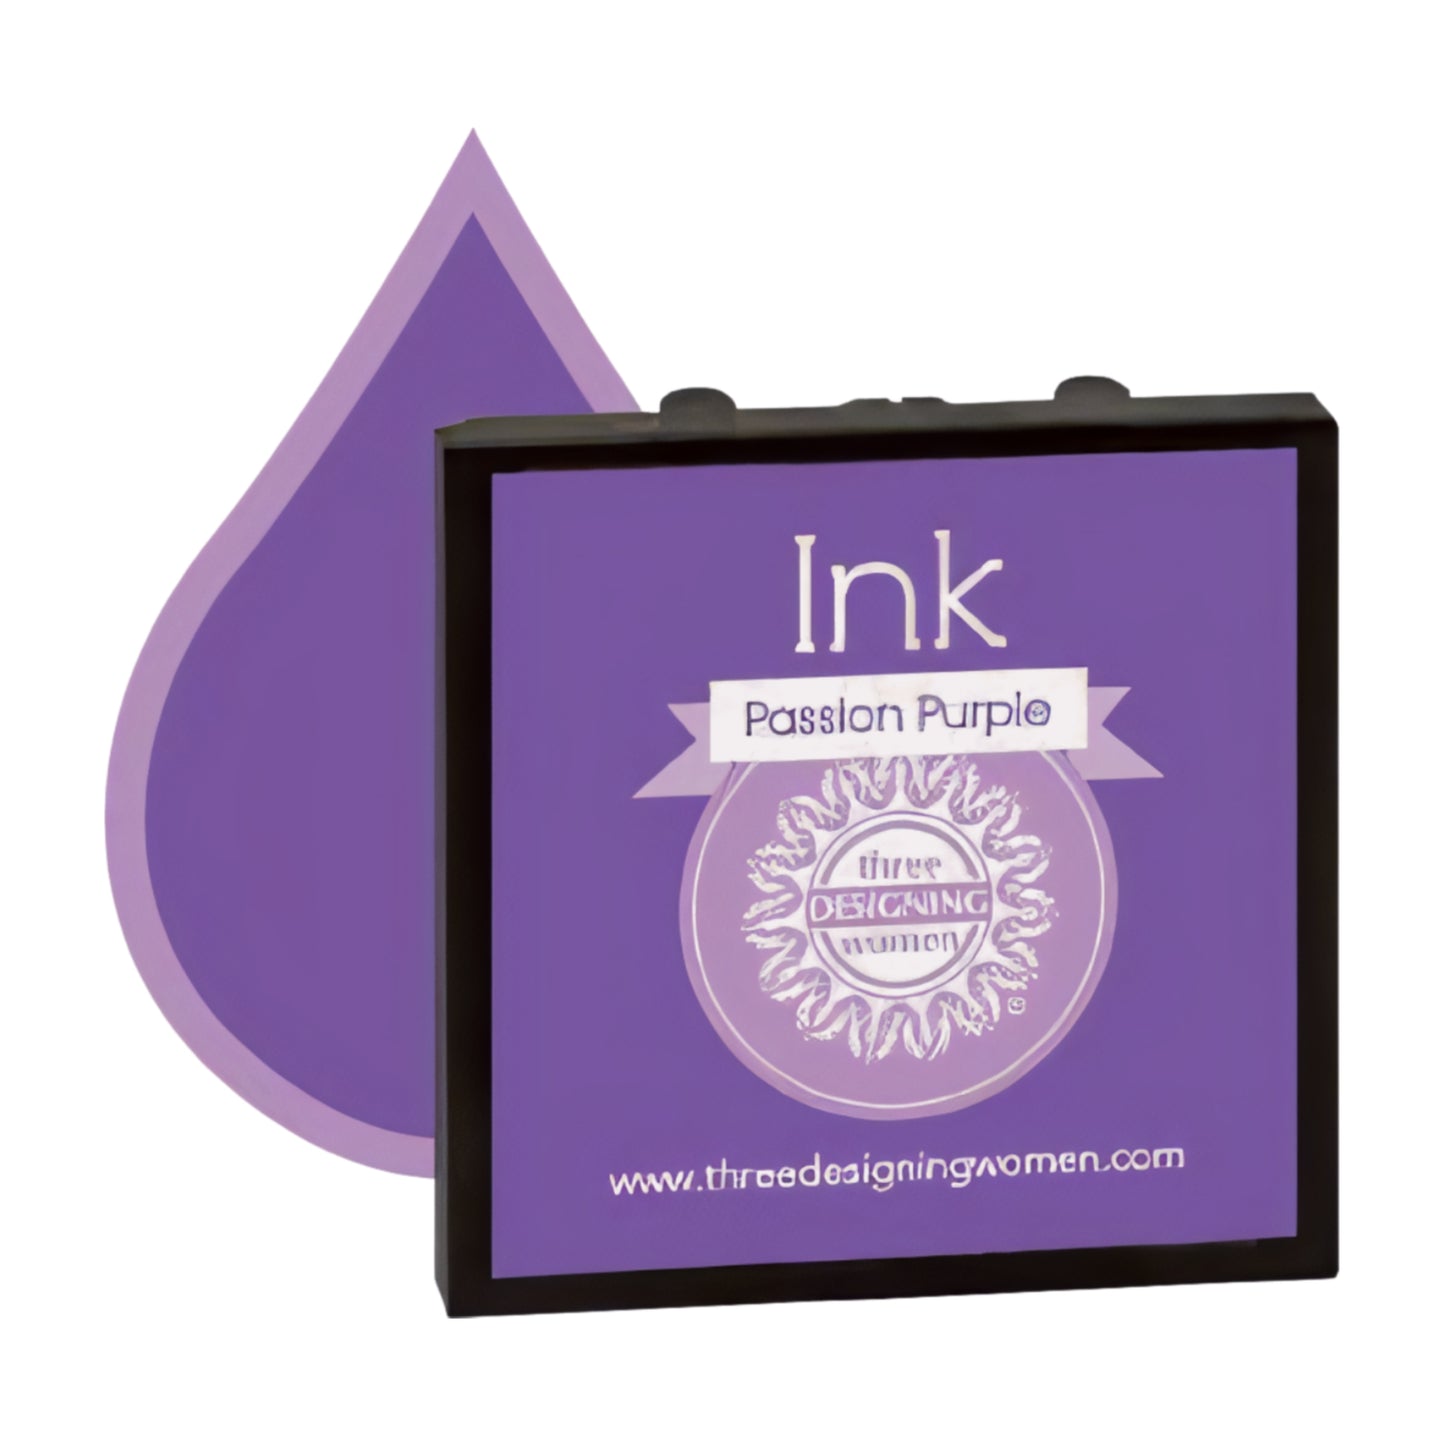 Ink Replacement Cartridge "Passion Purple" for Self-Inking Stampers Three Designing Women